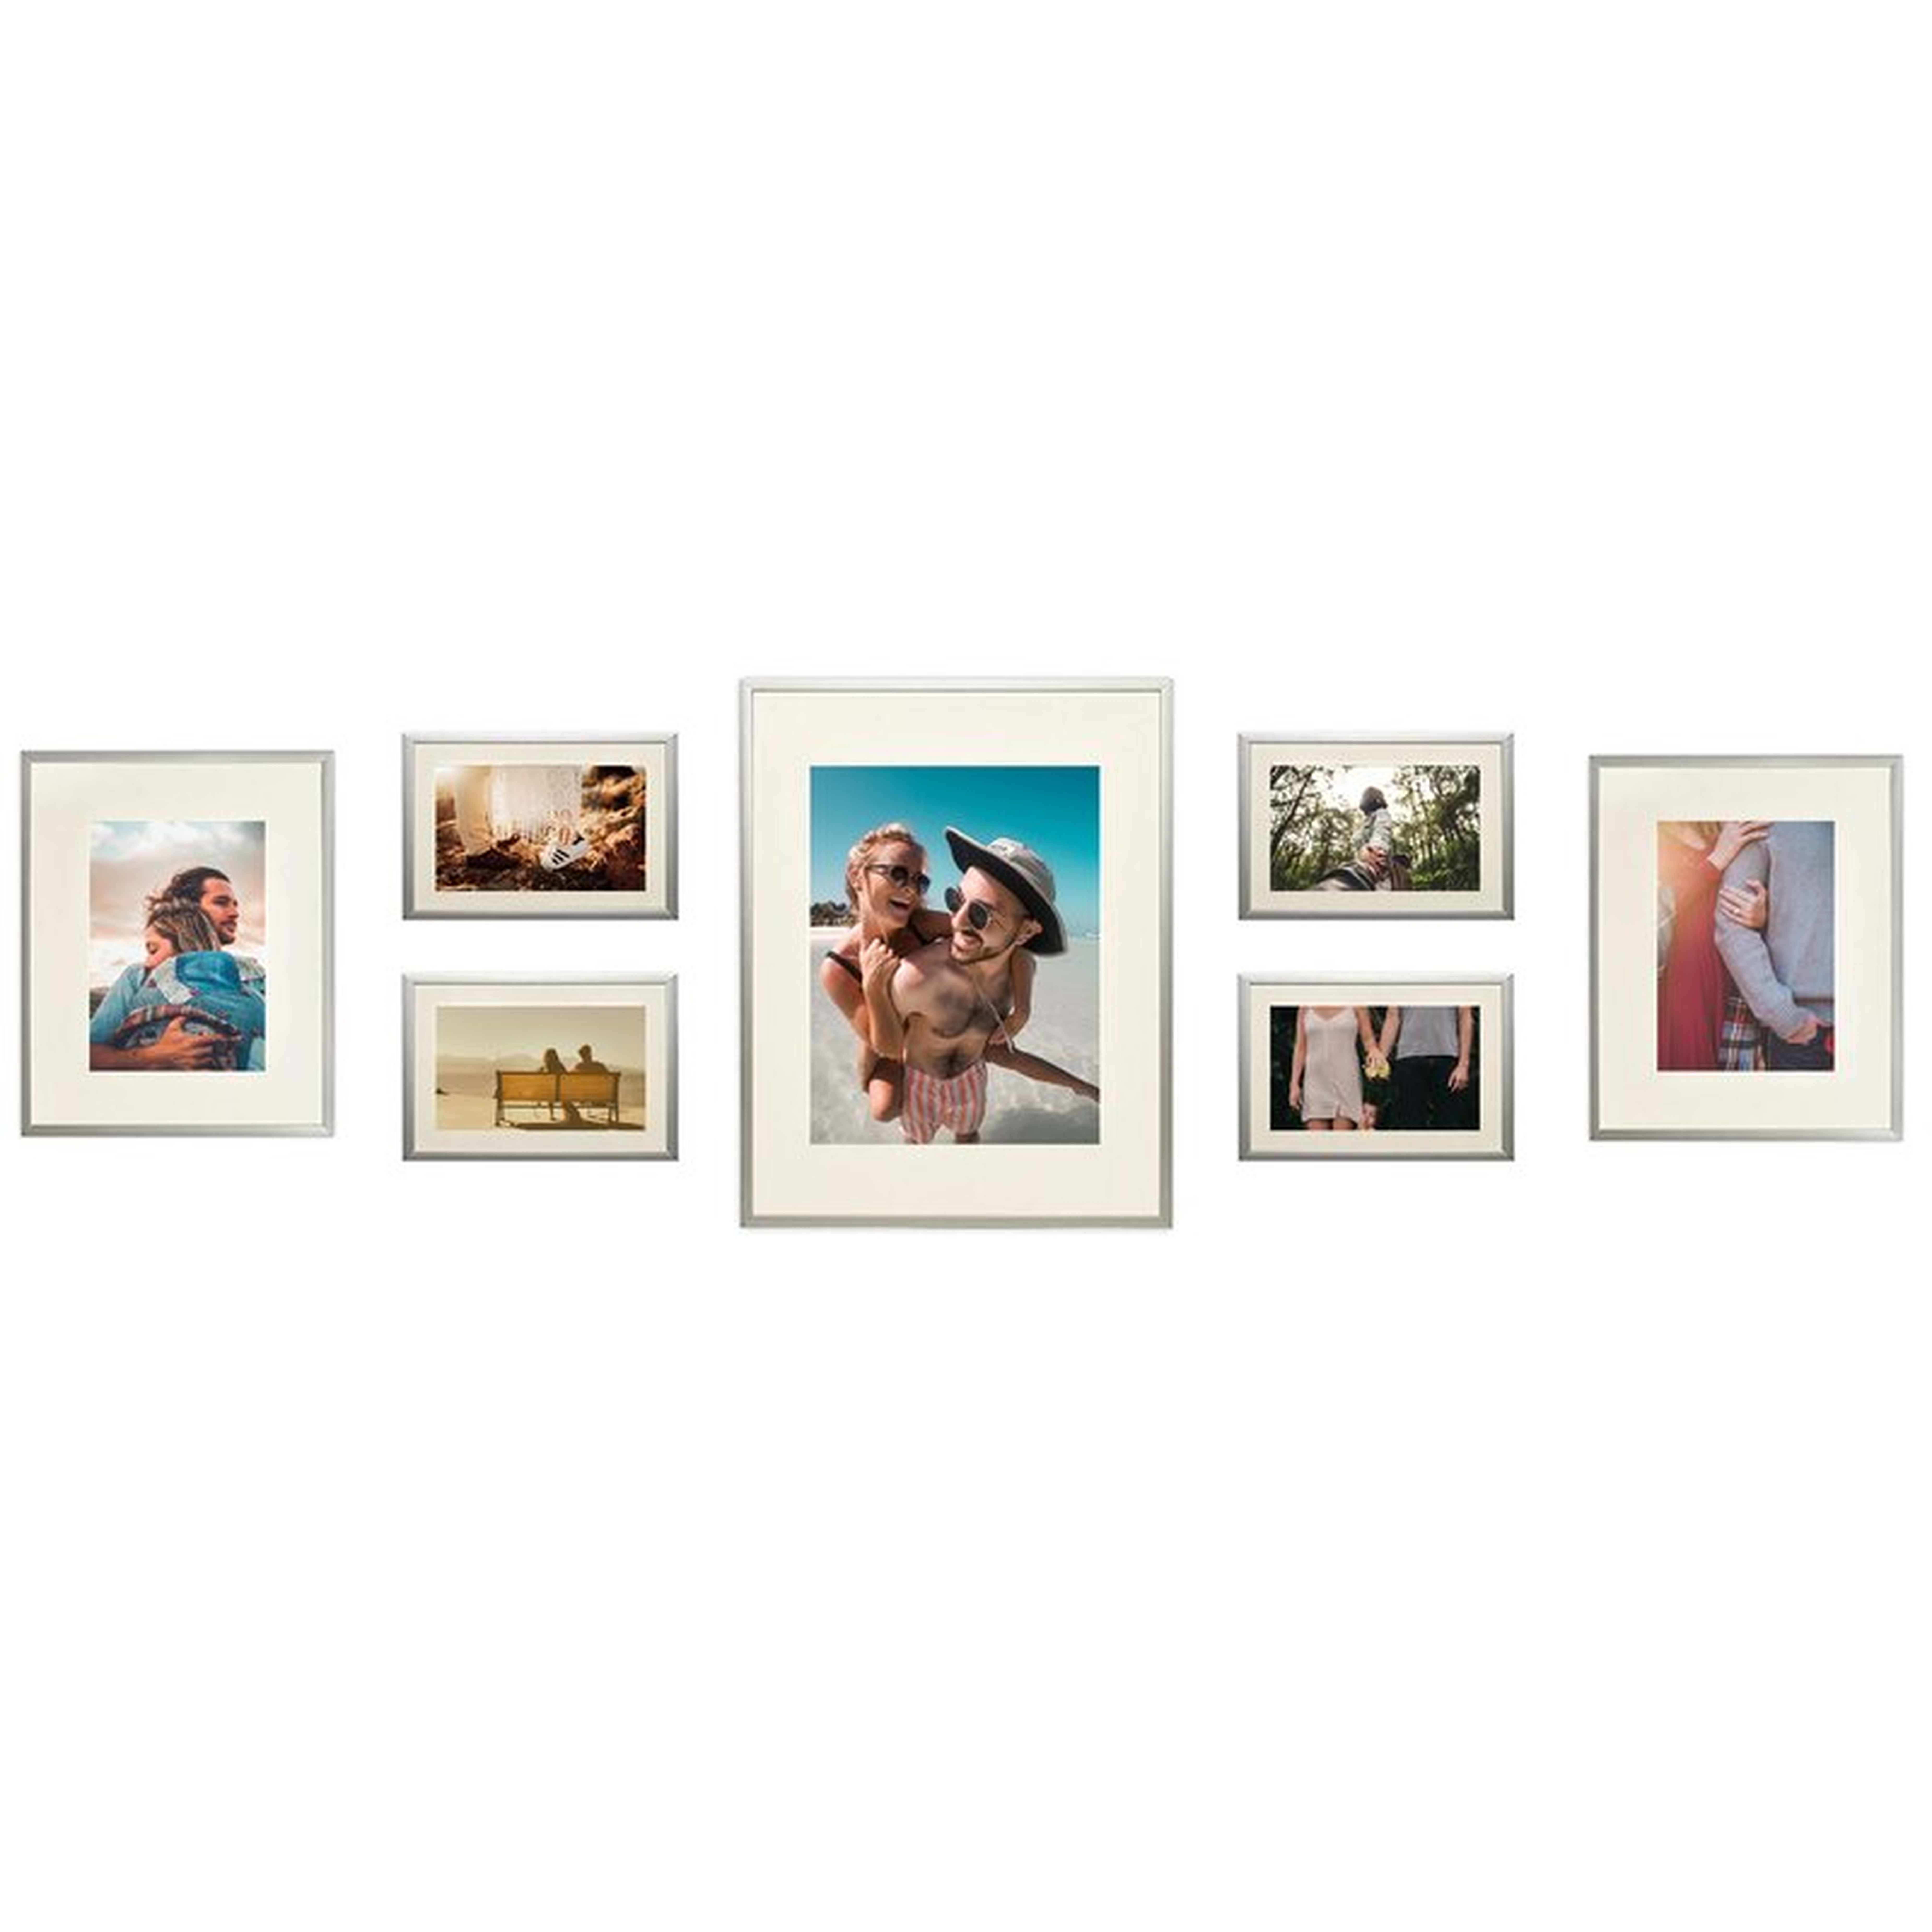 Alisson 7 Piece Gallery Wall Aluminum Picture Frame Set - Wayfair